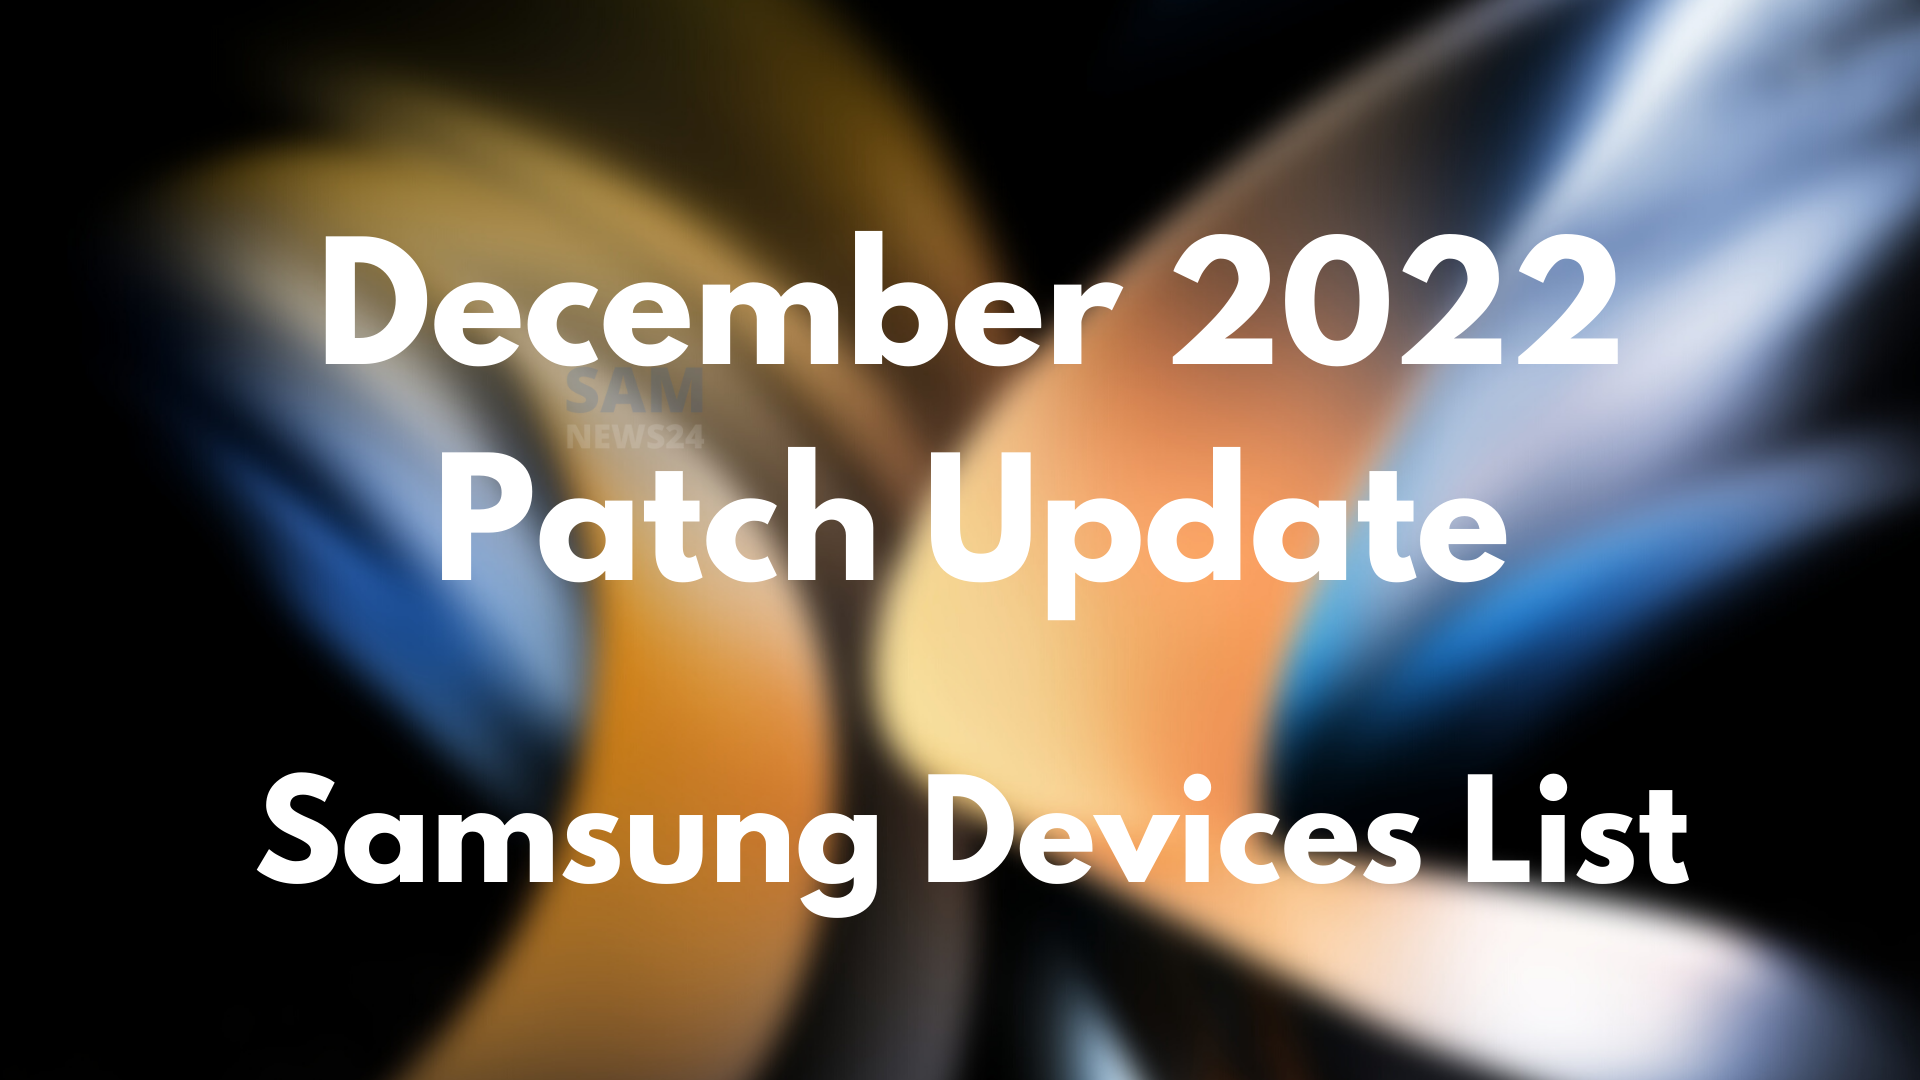 These Samsung devices have received December 2022 update so far